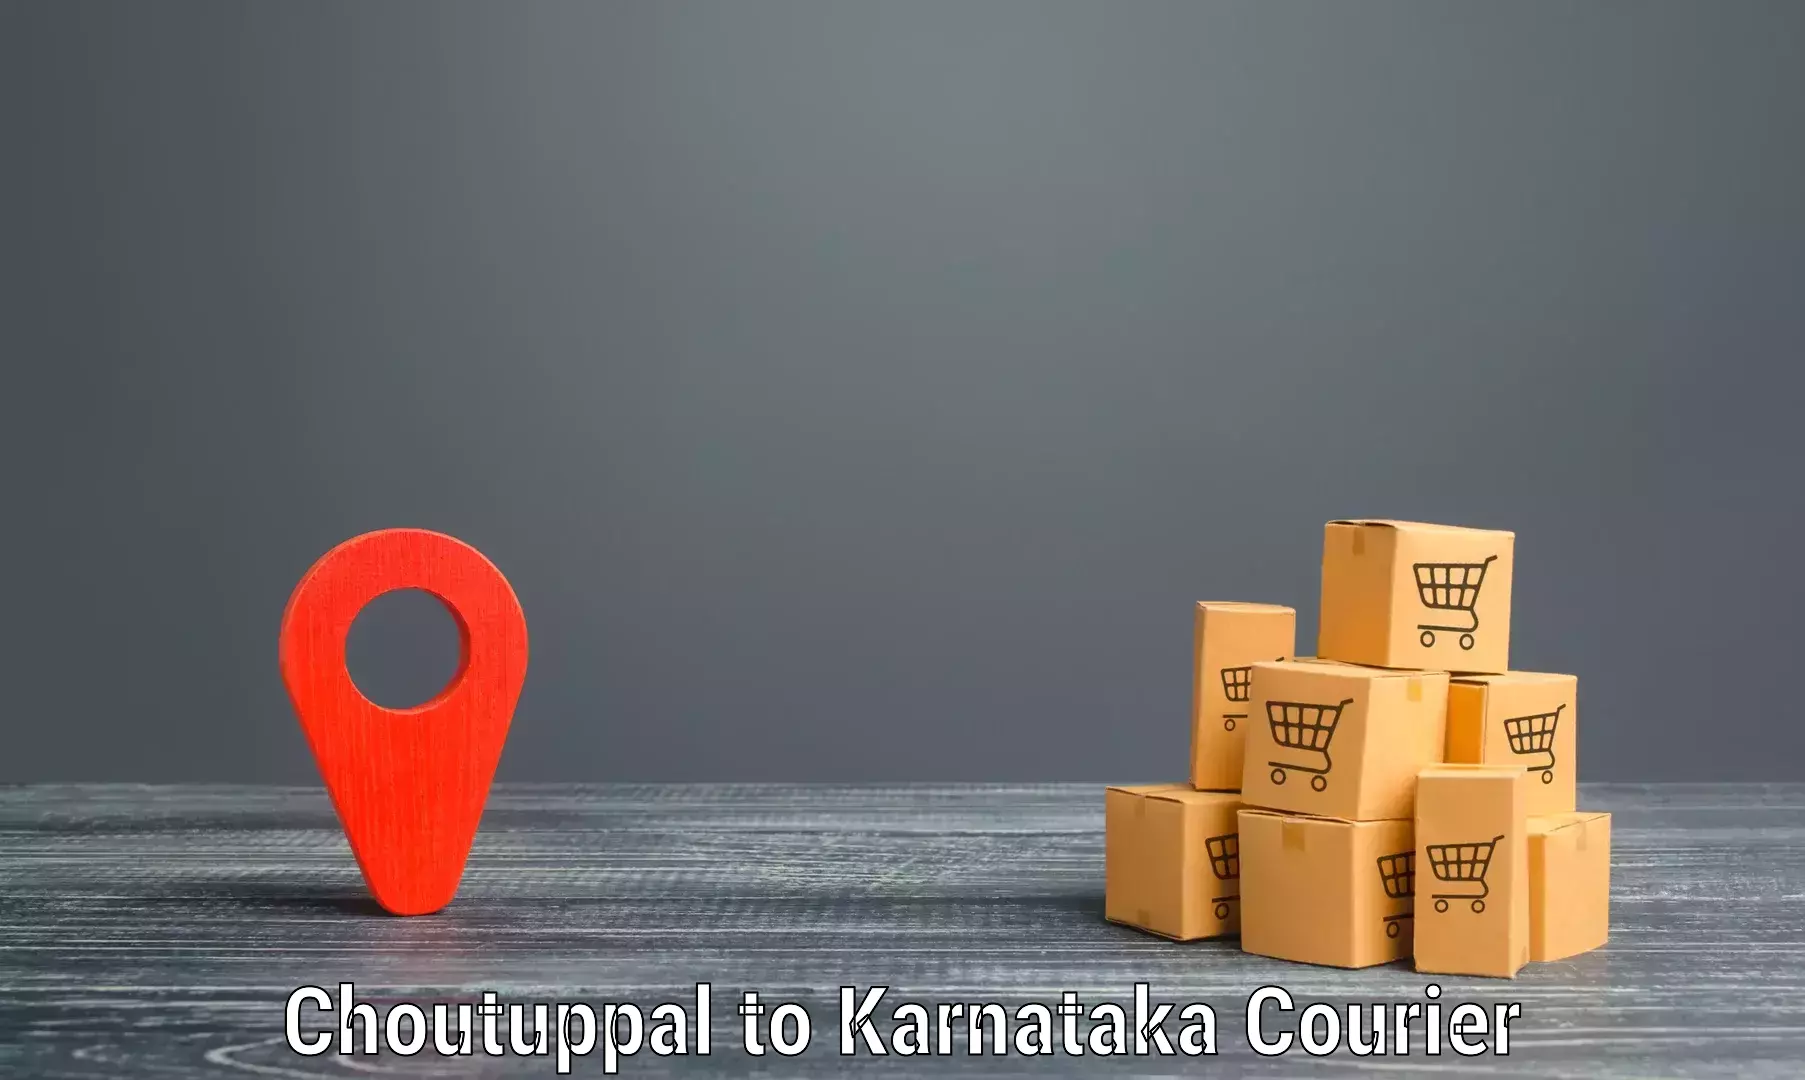 High-speed parcel service Choutuppal to Indi